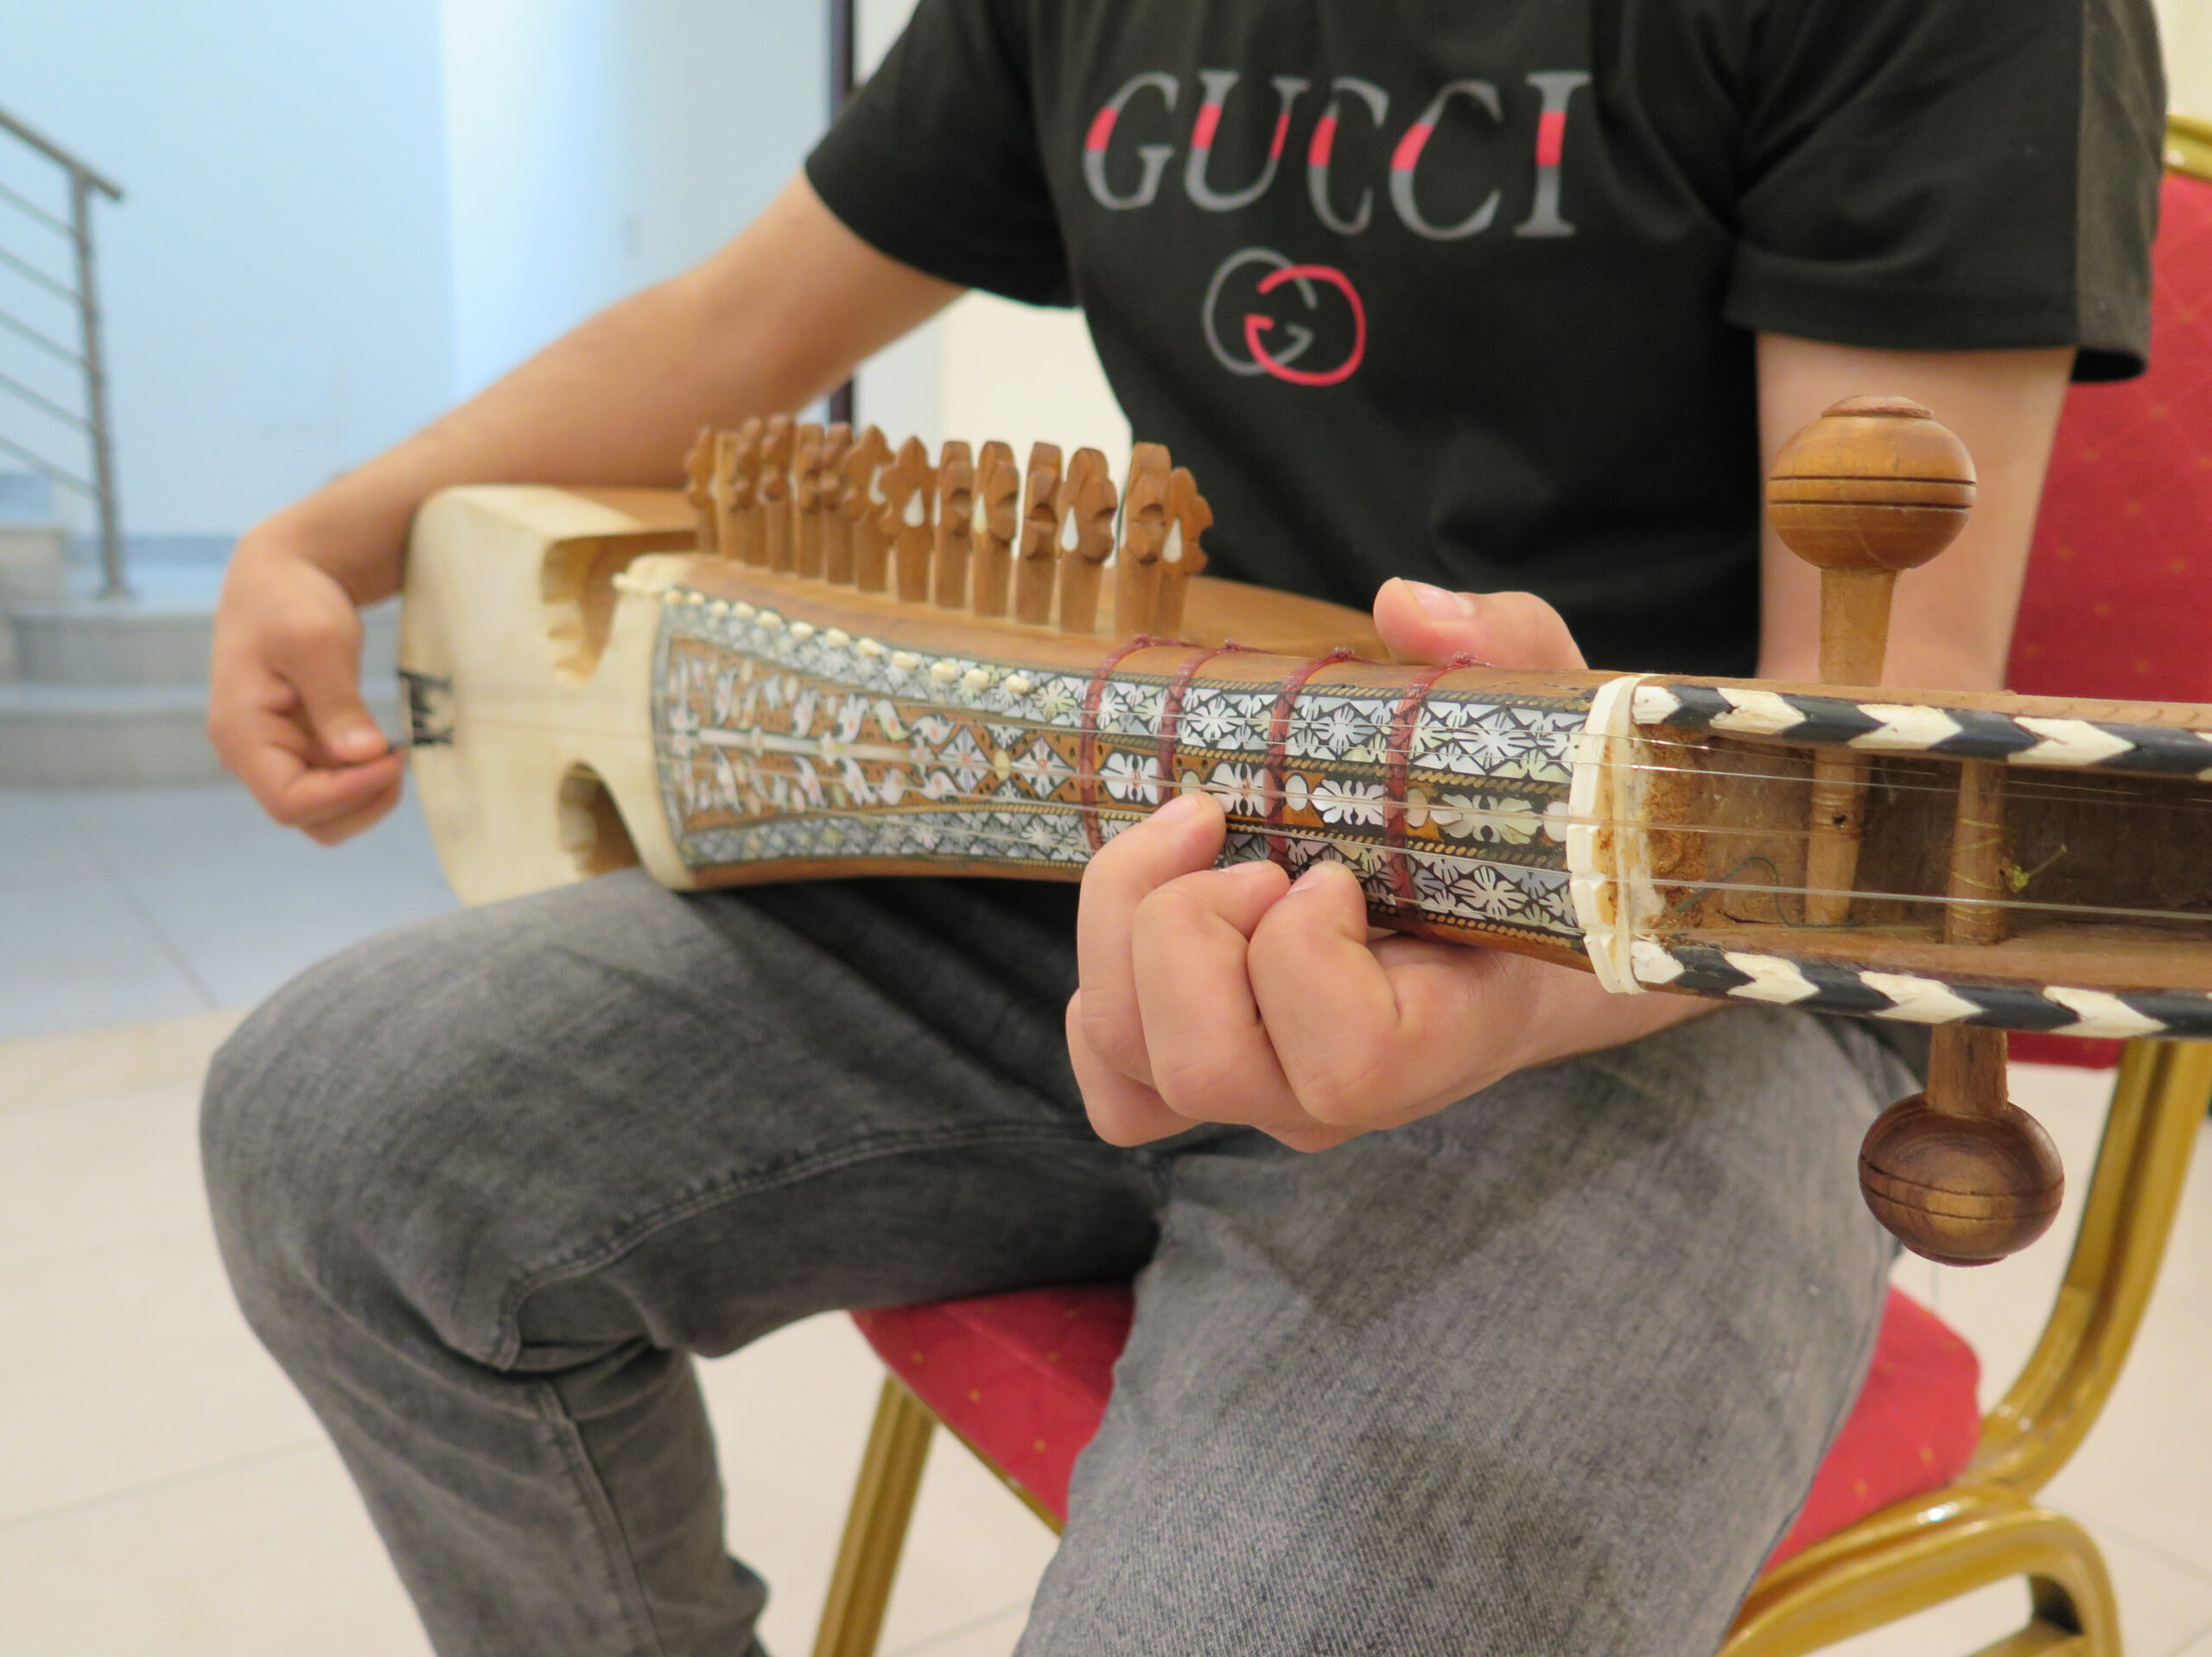 Afghan Musicians Find New Home in Portugal After Taliban Bans Music in Afghanistan